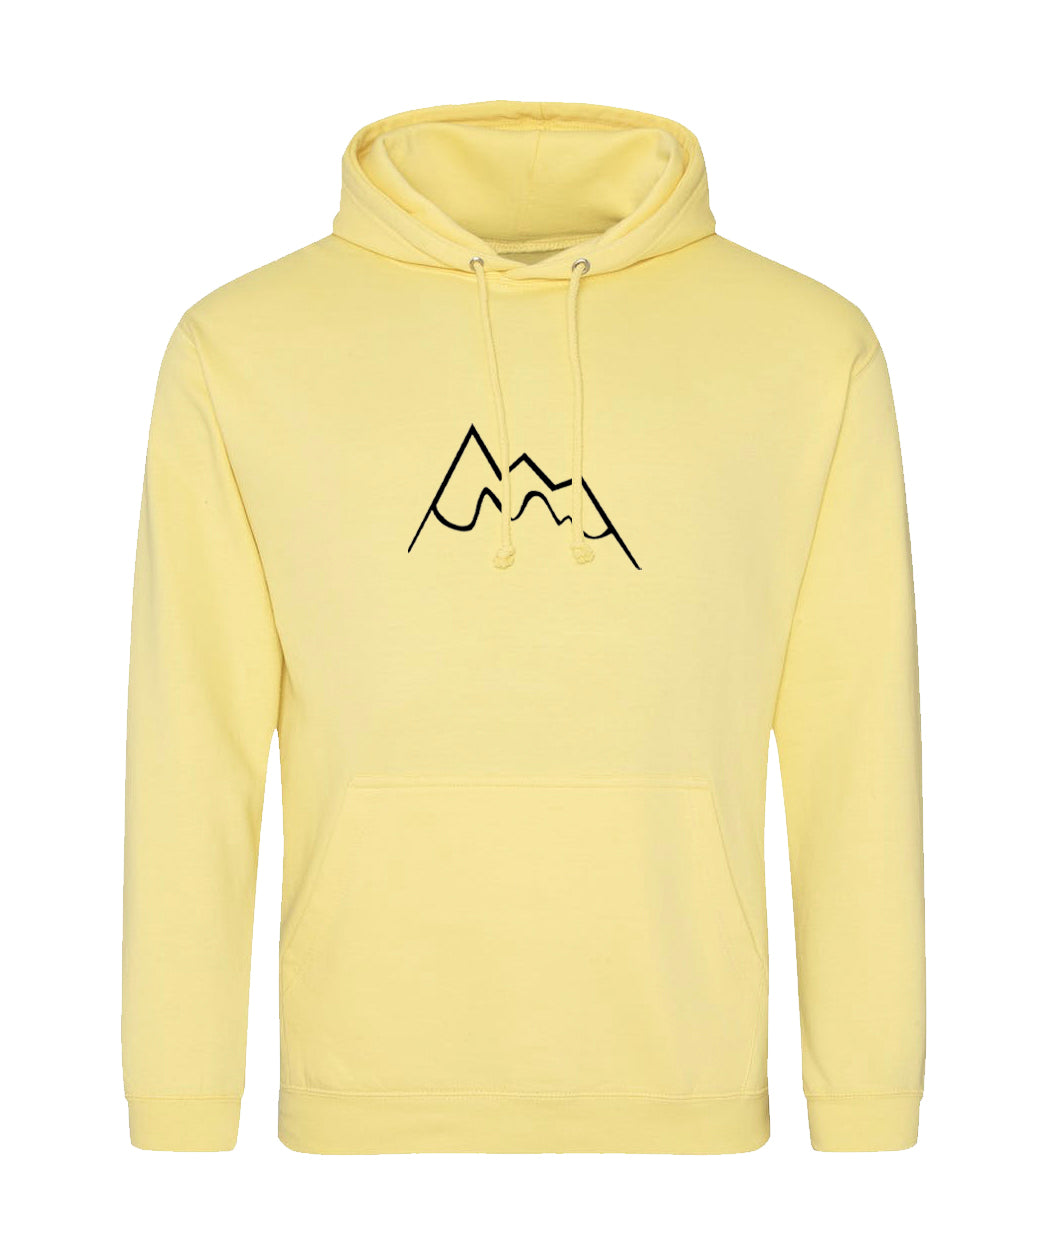 Snowy Mountains Hoodie